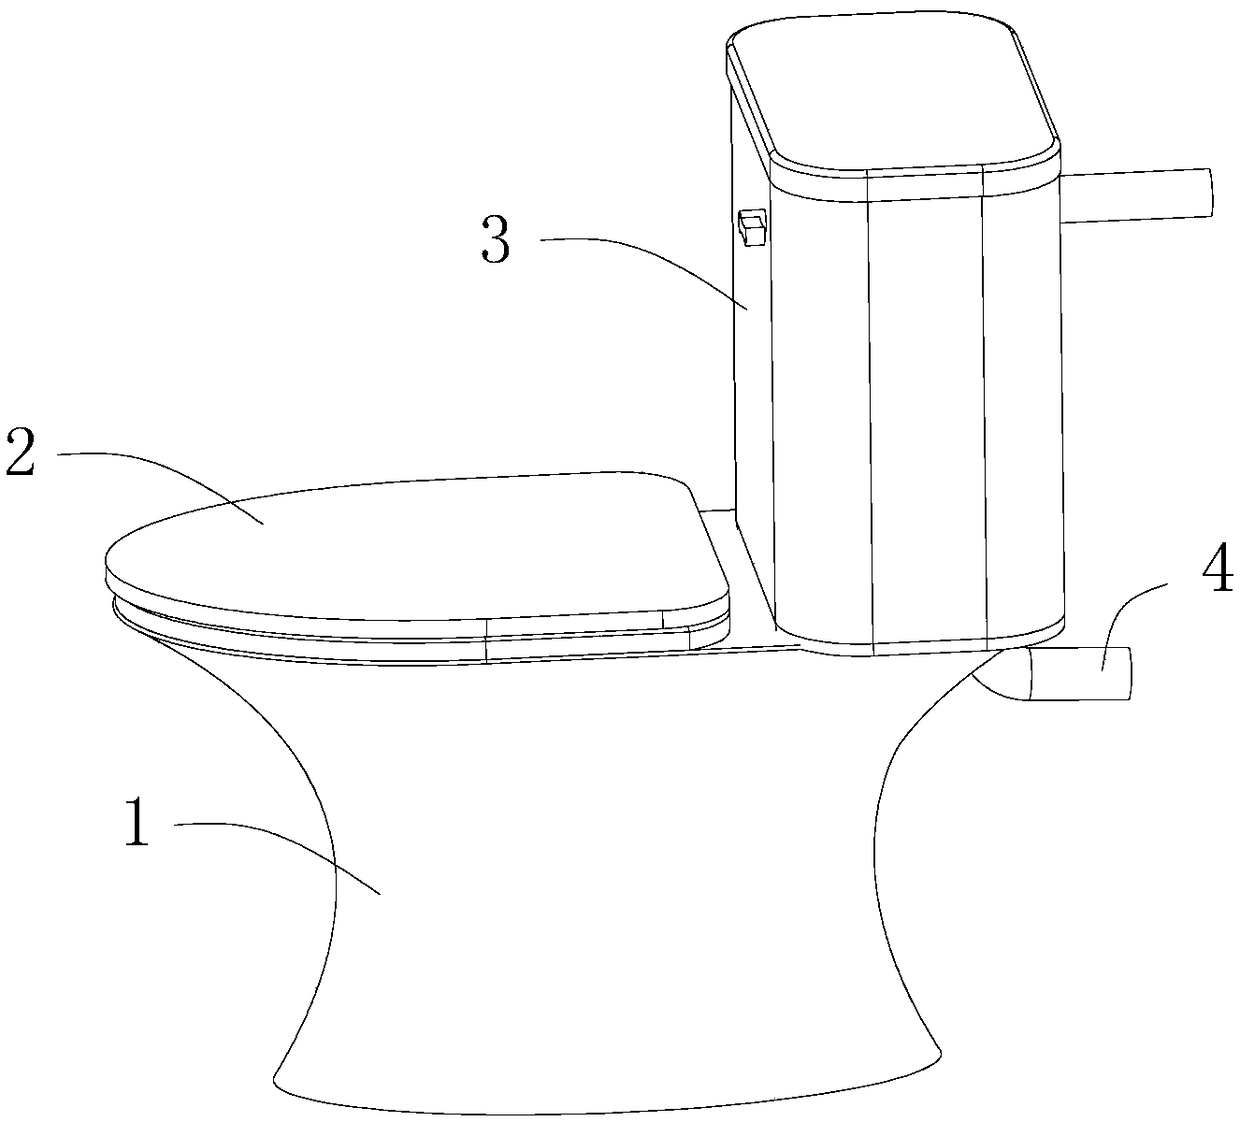 Water closet capable of achieving recycling of domestic sewage